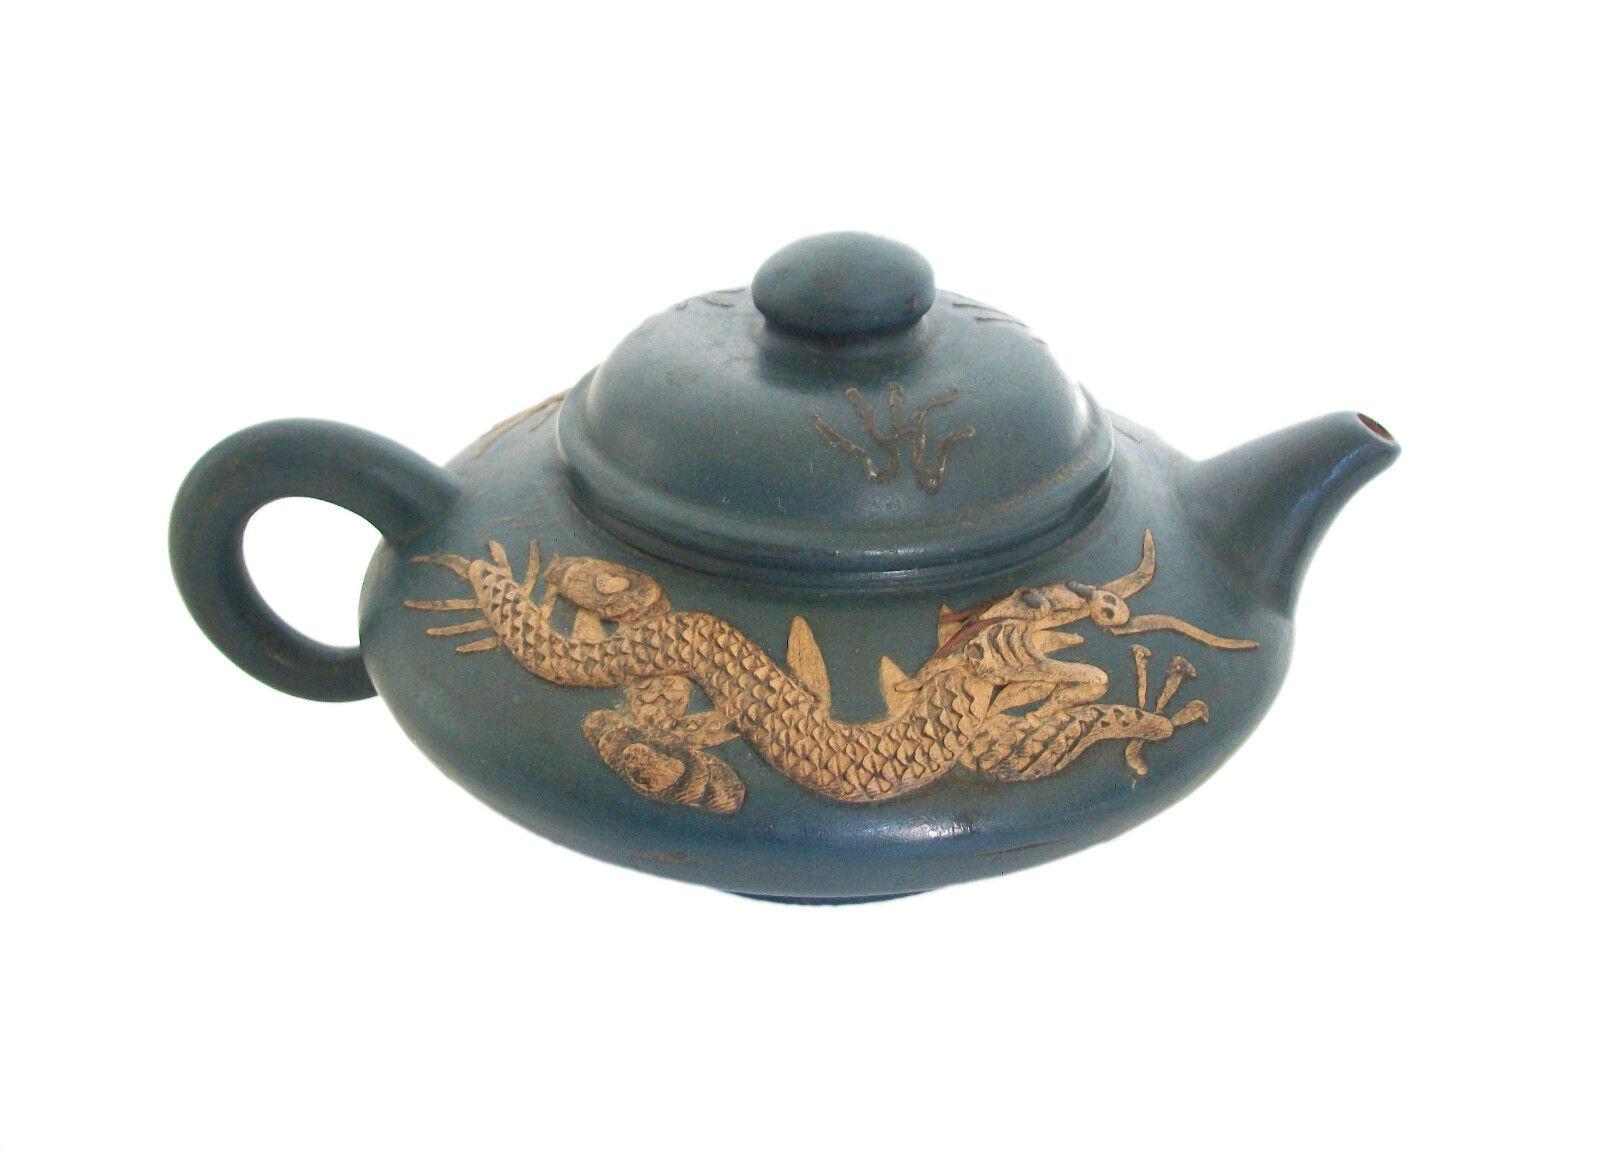 Vintage Yixing Zisha teapot - rare indigo glaze - finely carved dragons to each side - carved flames in relief to the lid - black stain to the hand carved areas with highlights in red - signed on the base and to the interior of the lid (unidentified